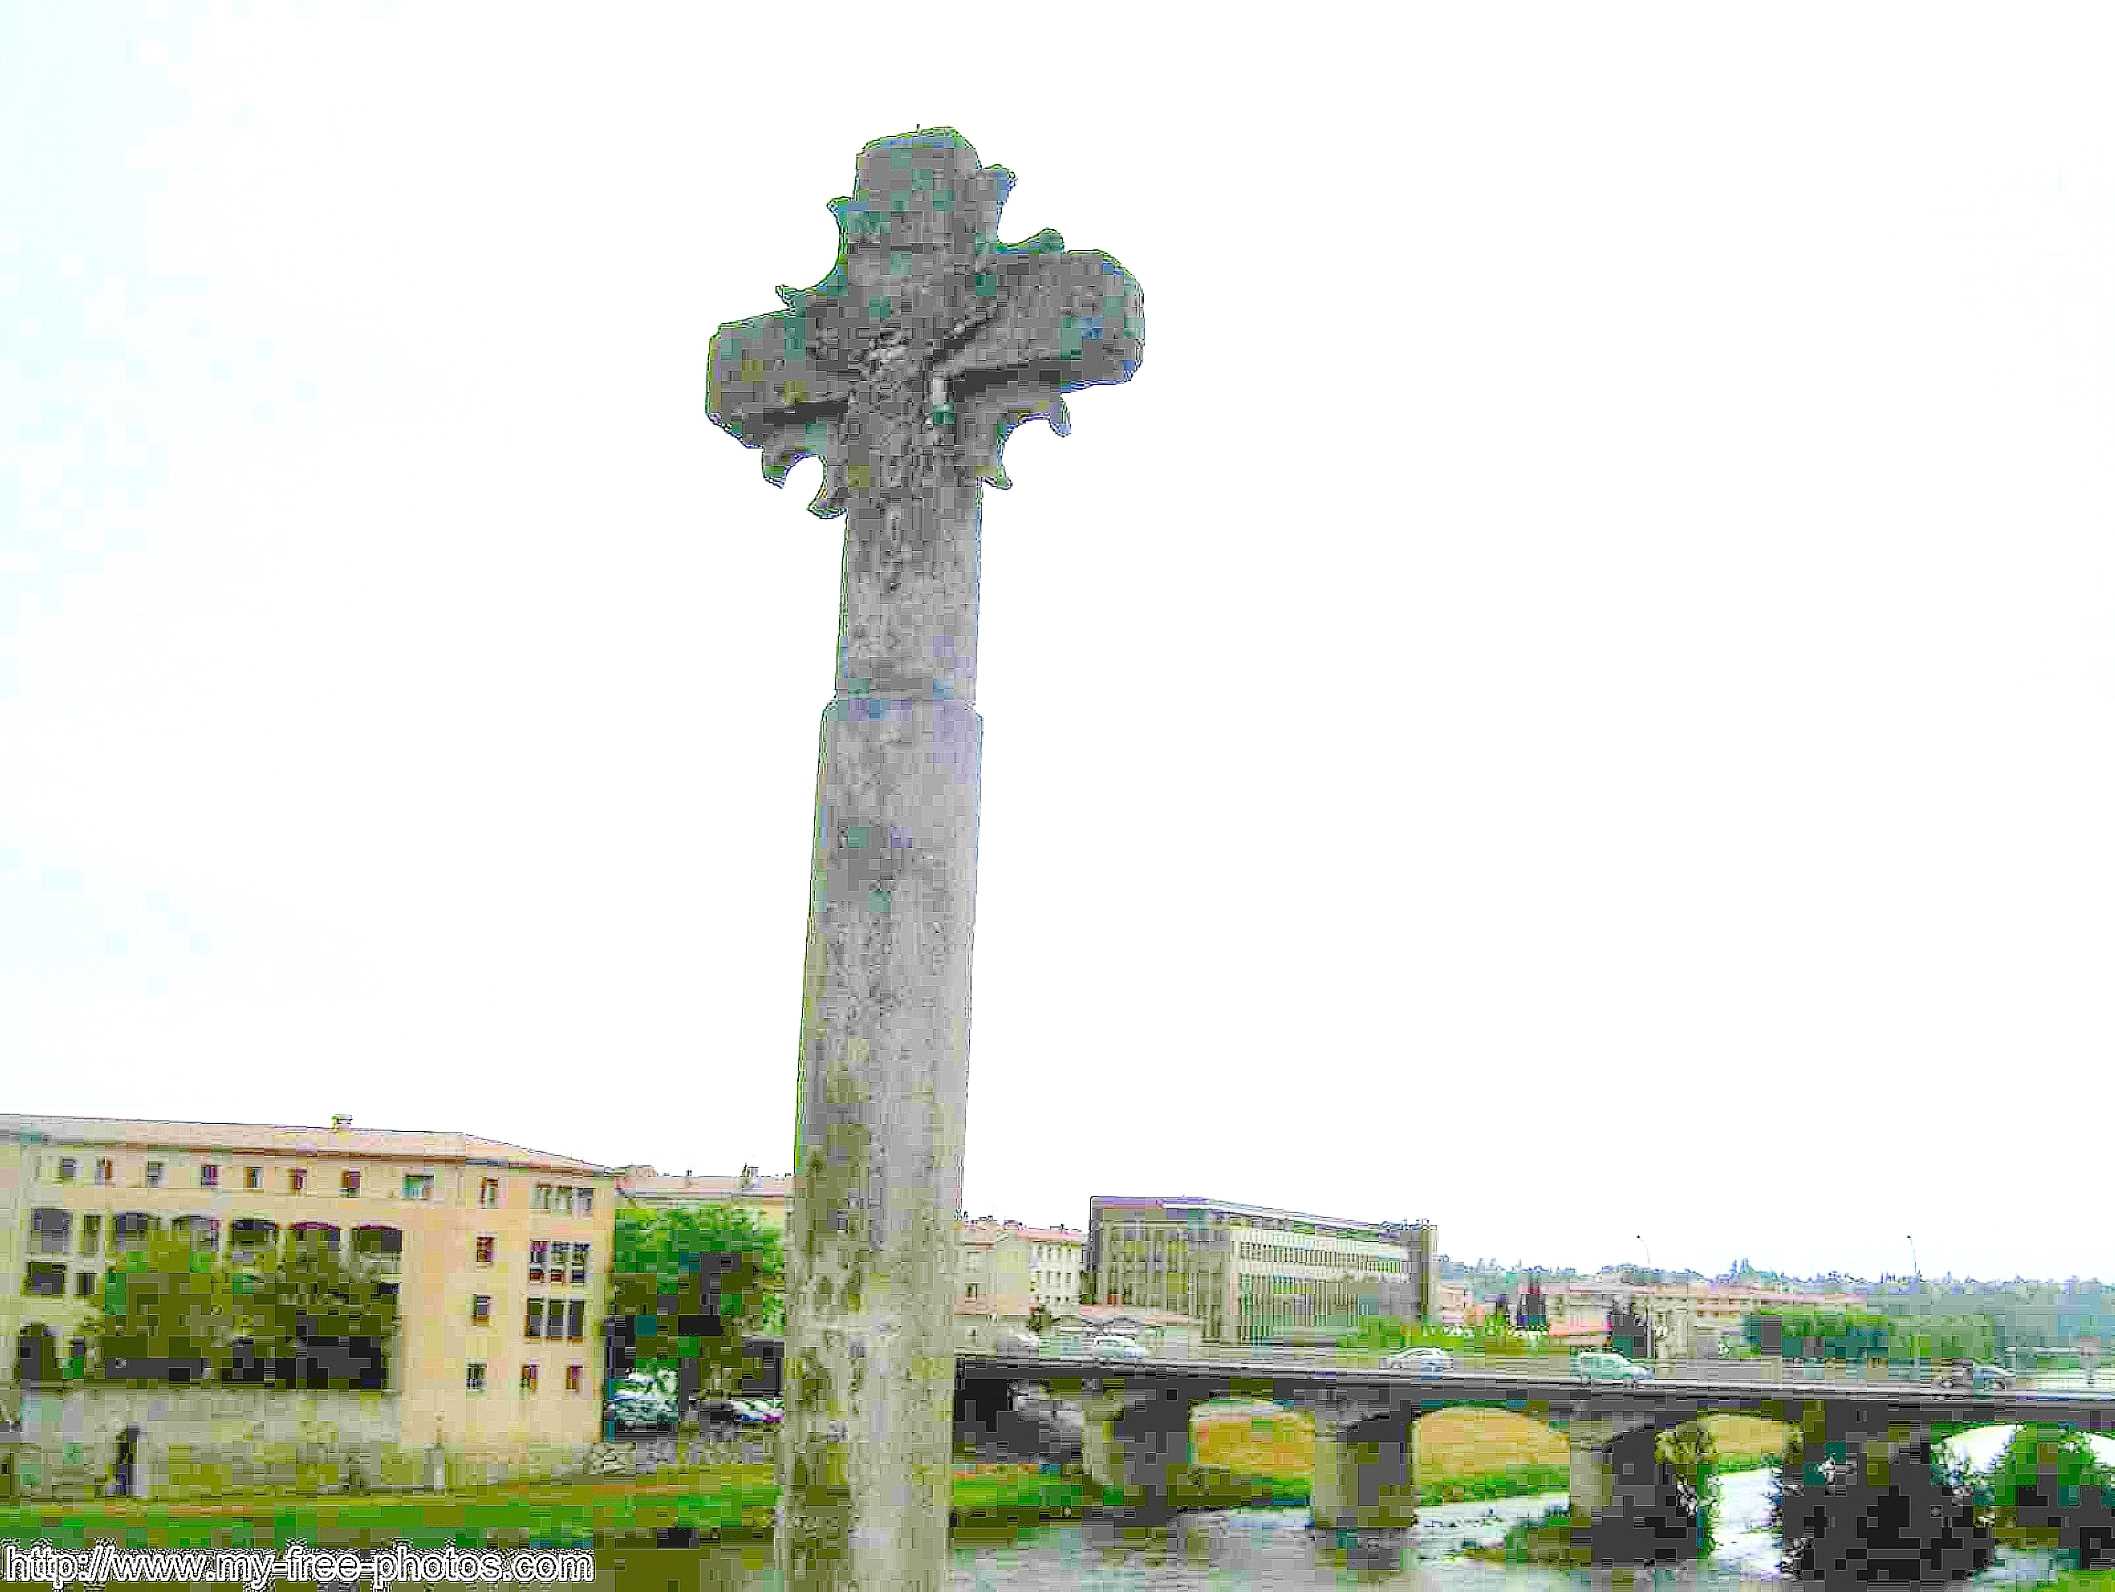 The Cross of Carcassonne, France